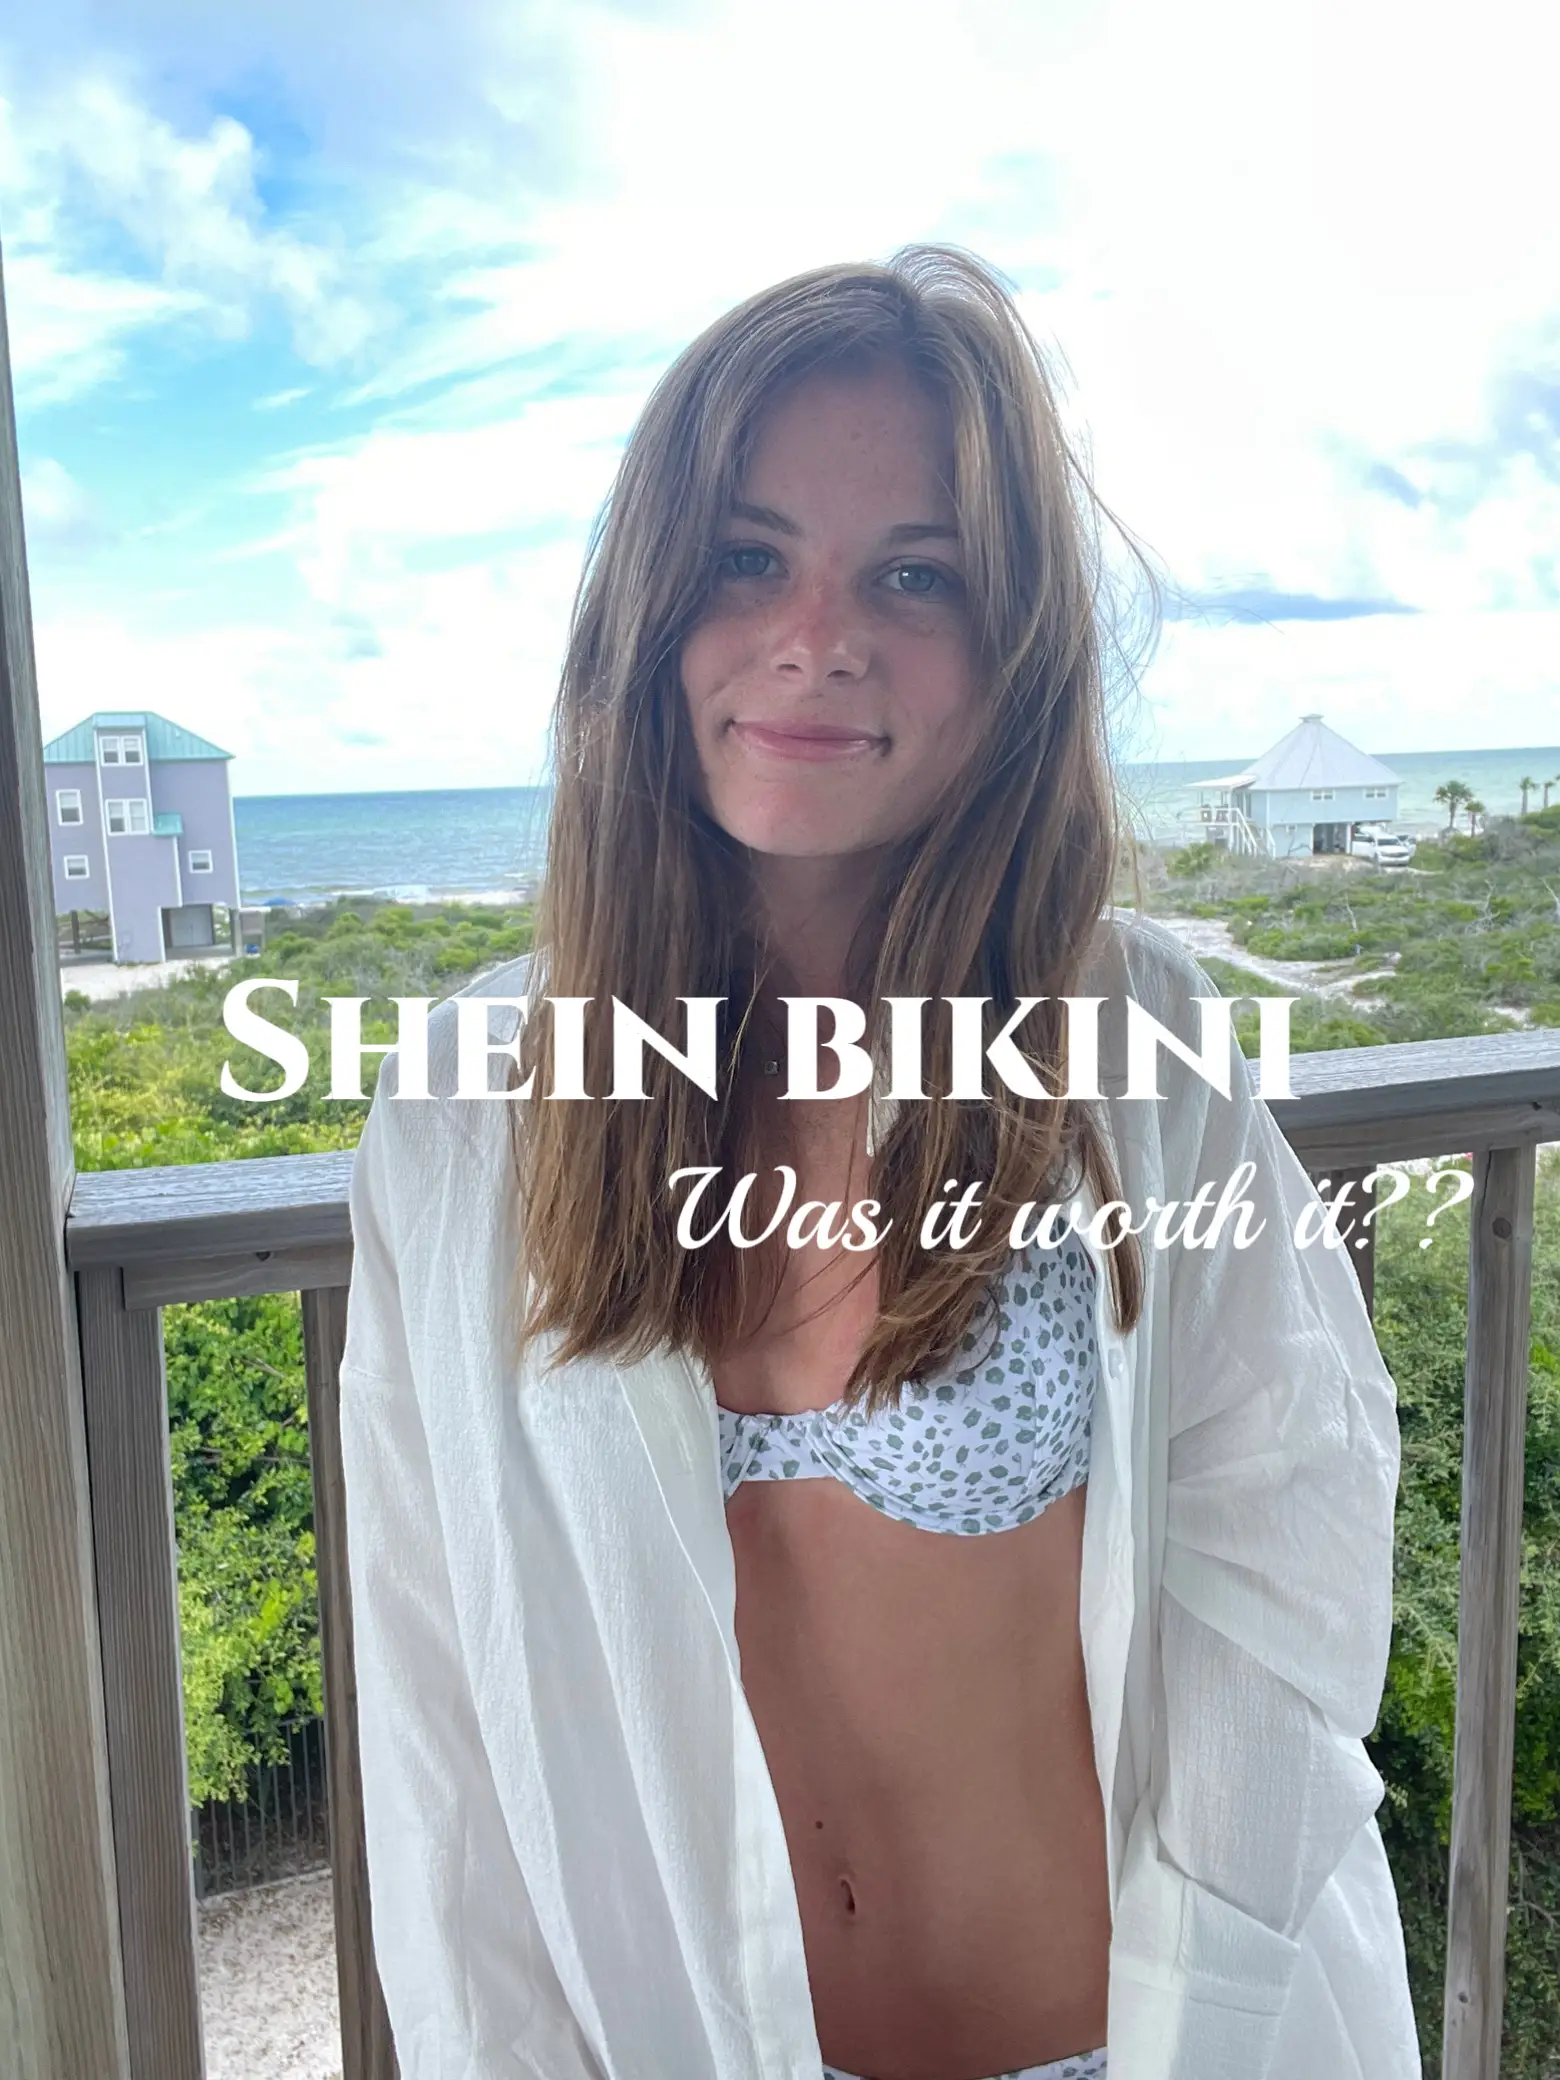 SHEIN Bikini Try On Haul 💕, Gallery posted by Becca.scully